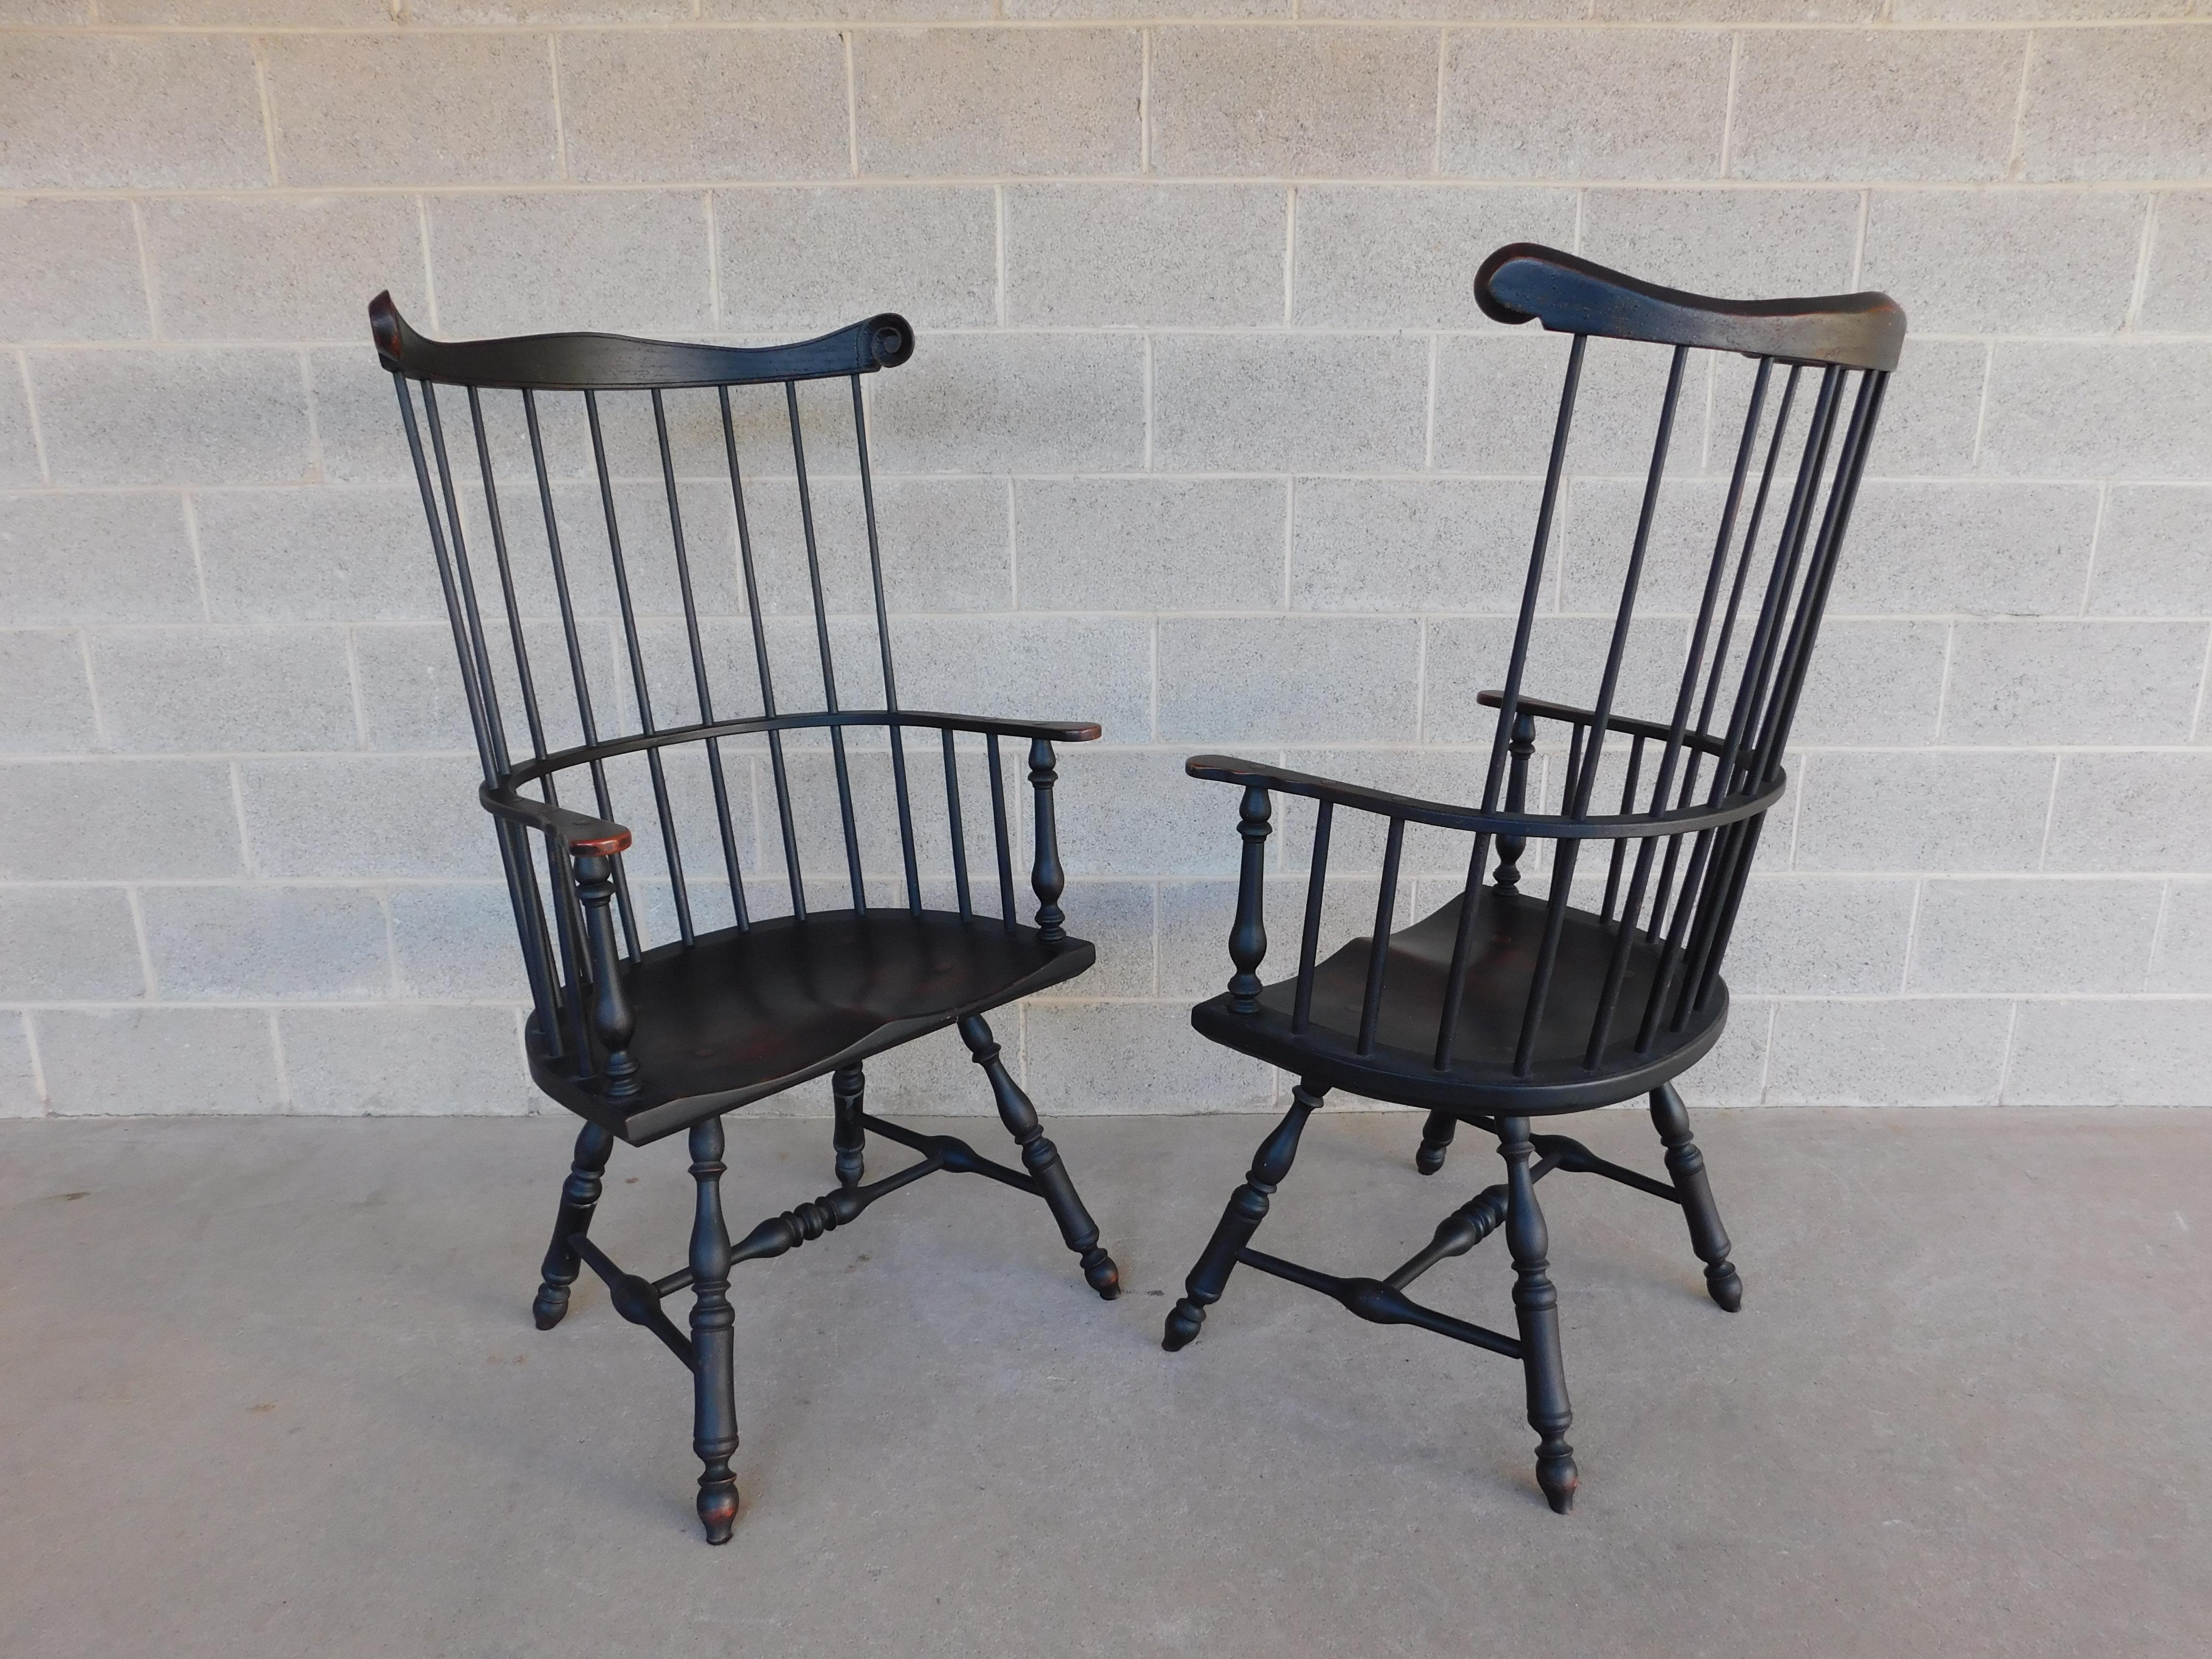 Custom Antiqued Distressed Finish Philadelphia Style Windsor Arm Chairs - a Pair 6